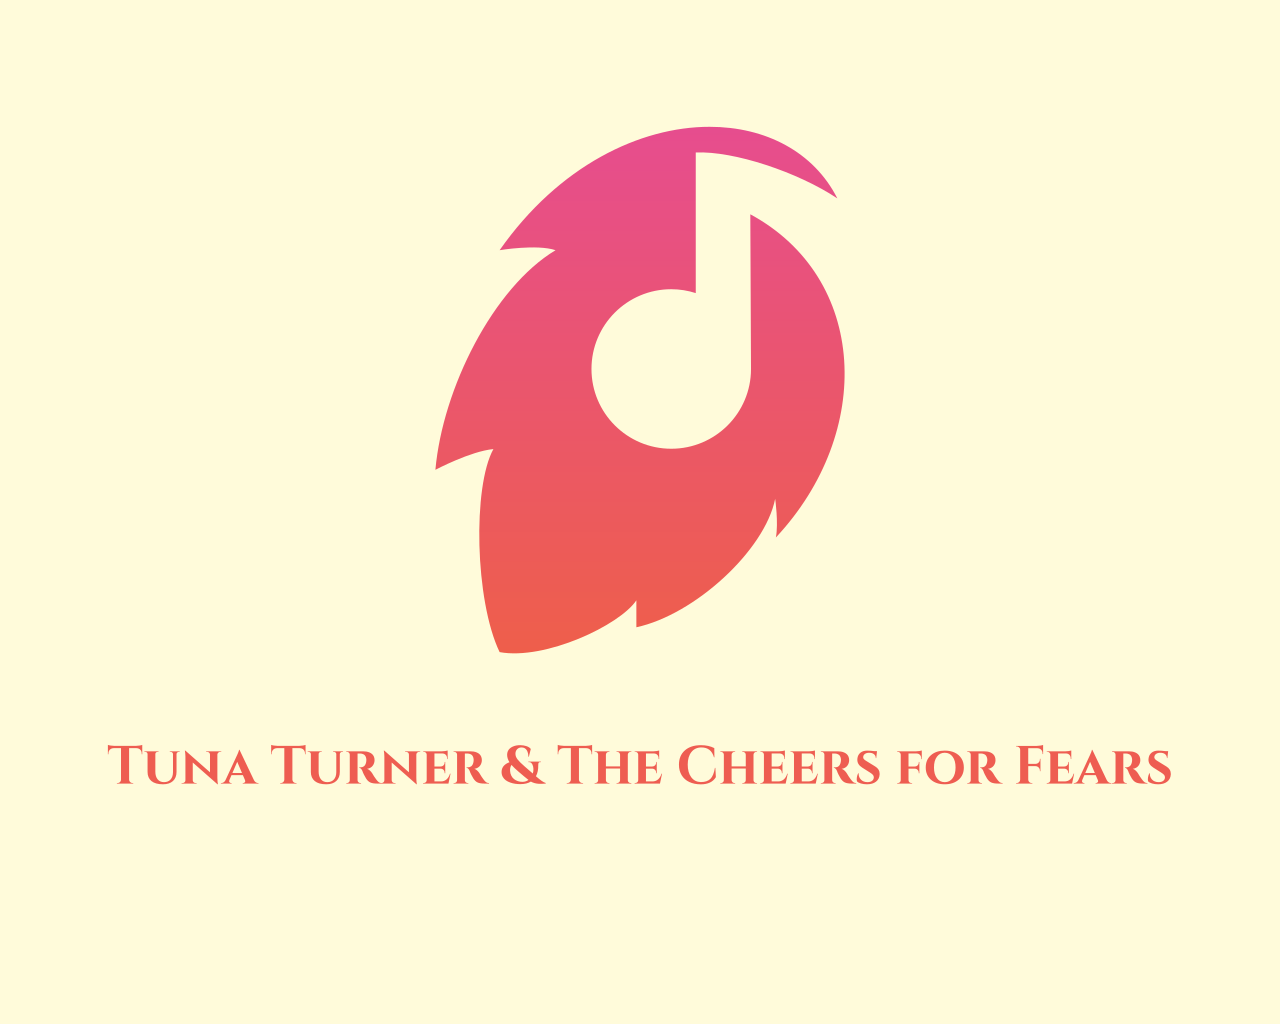 TUNA TURNER & THE CHEERS FOR FEARS's web page